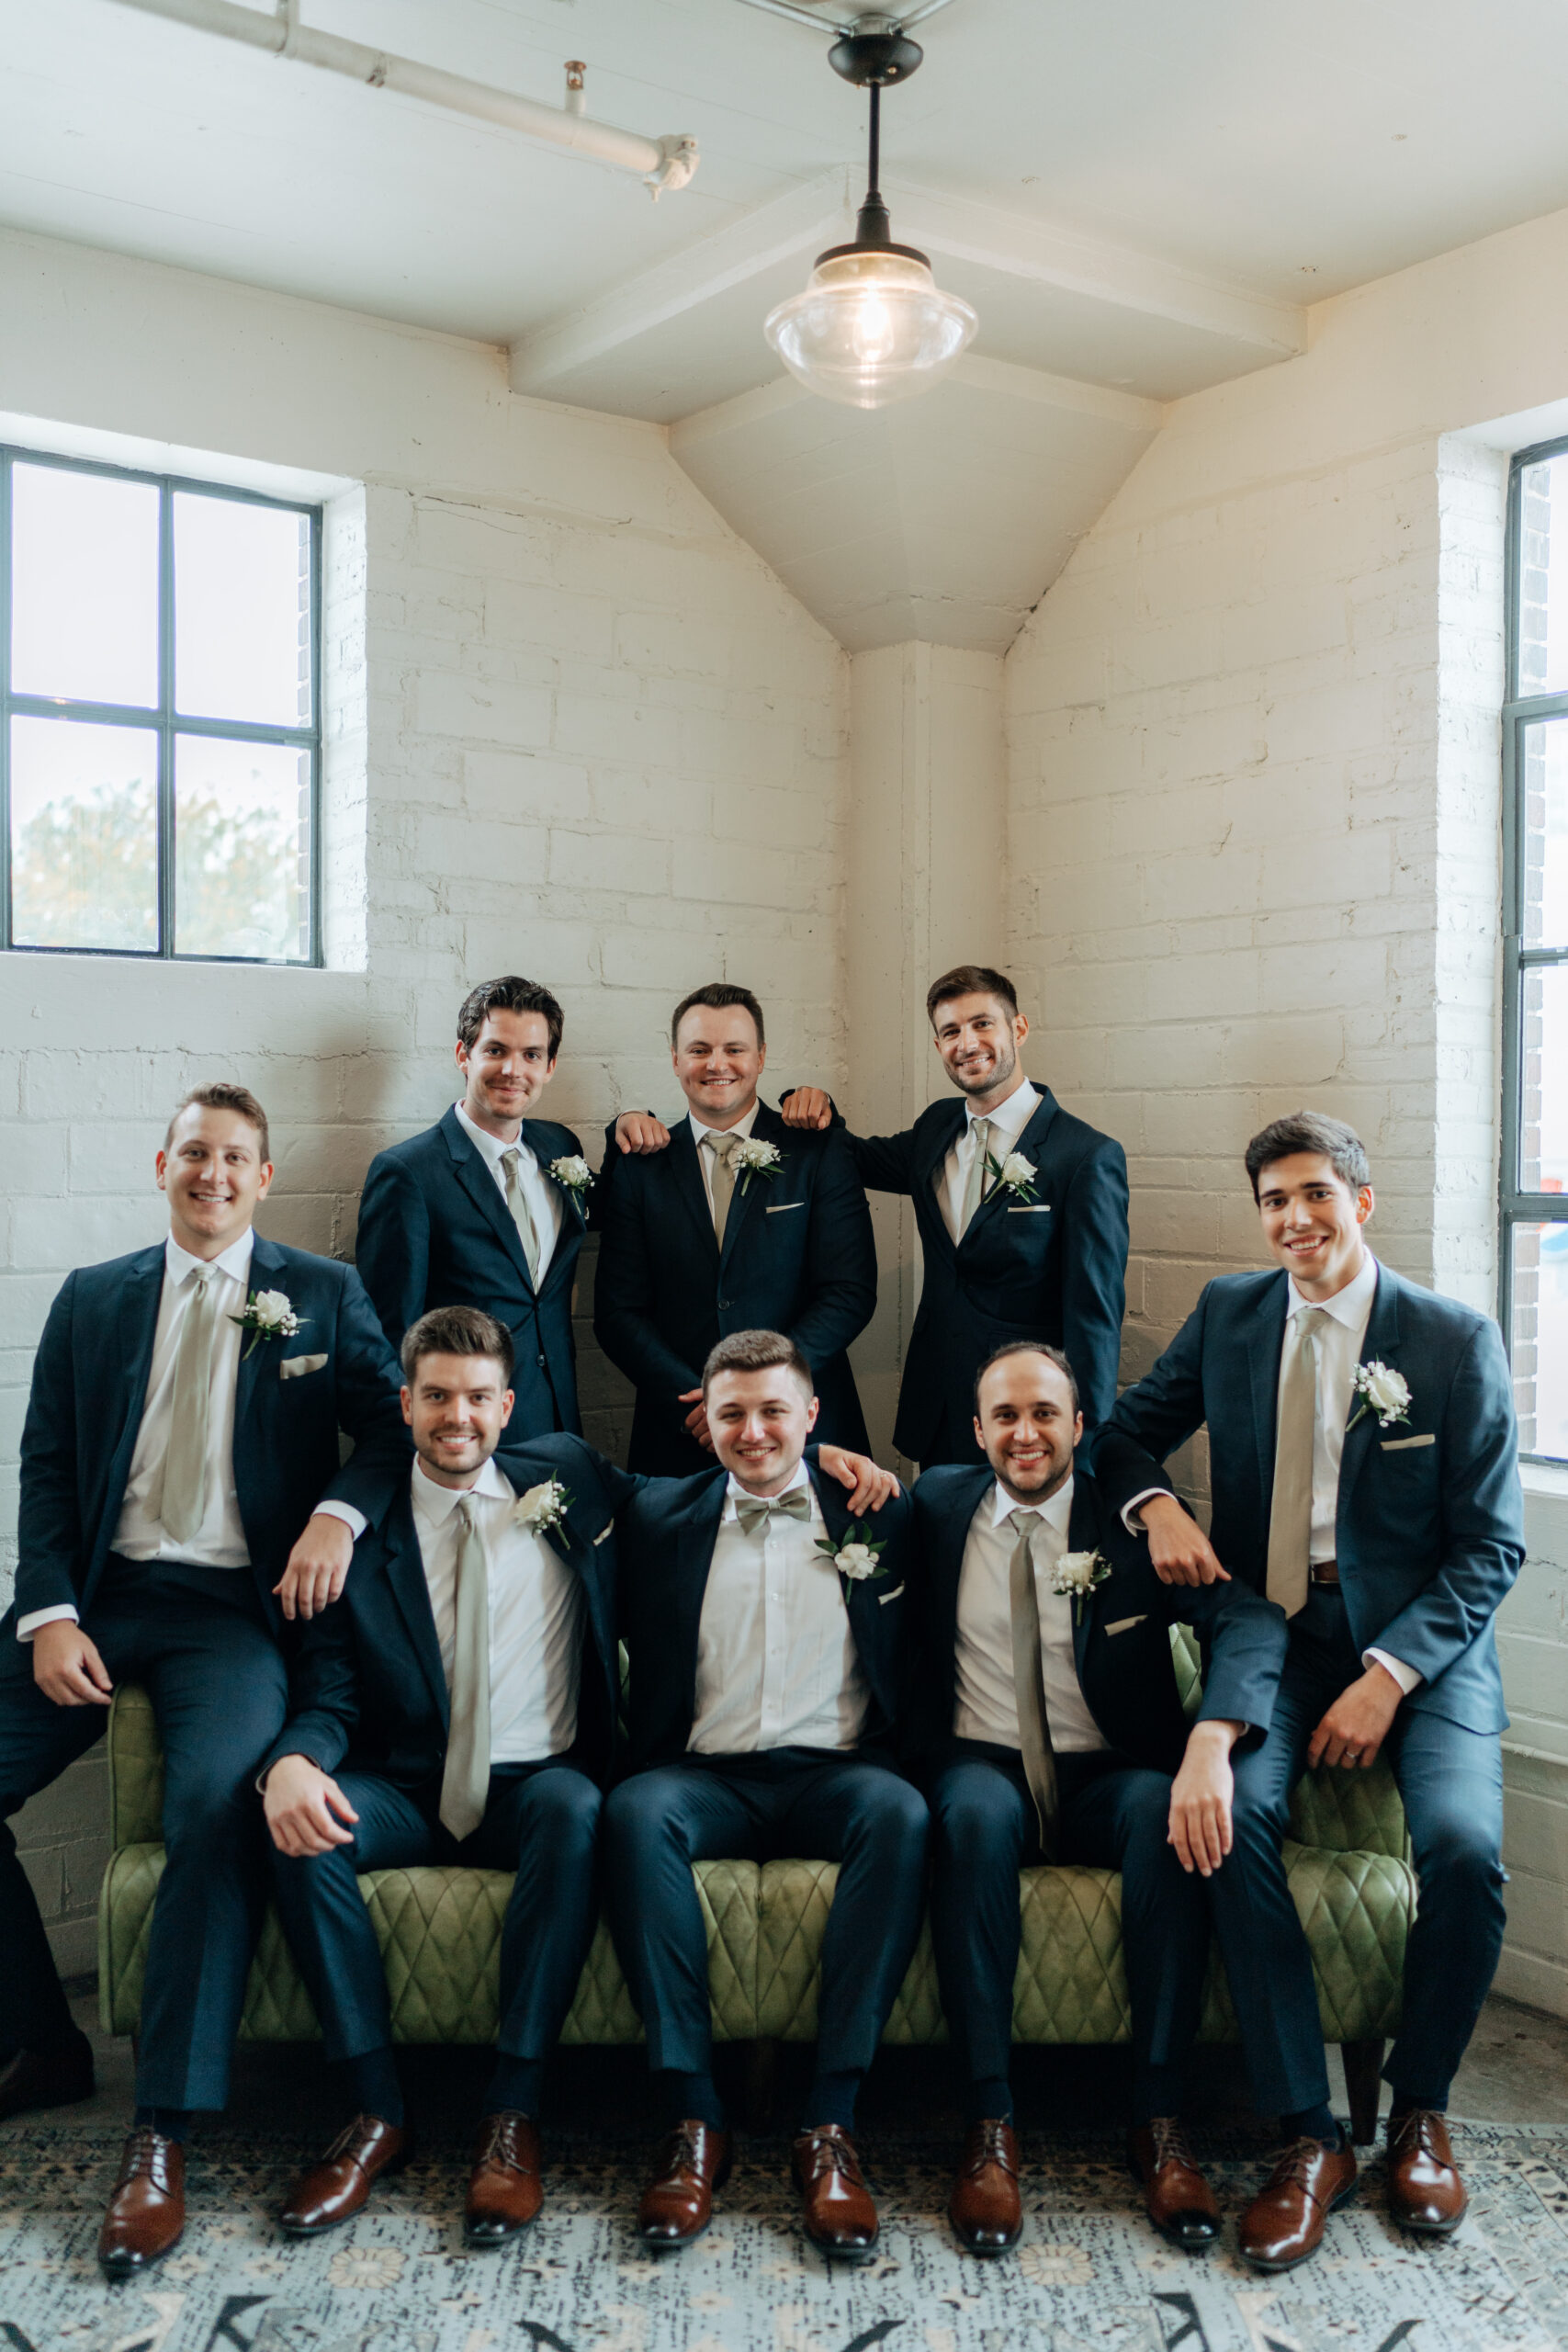 This is a picture of groomsmen taking a picture with the groom